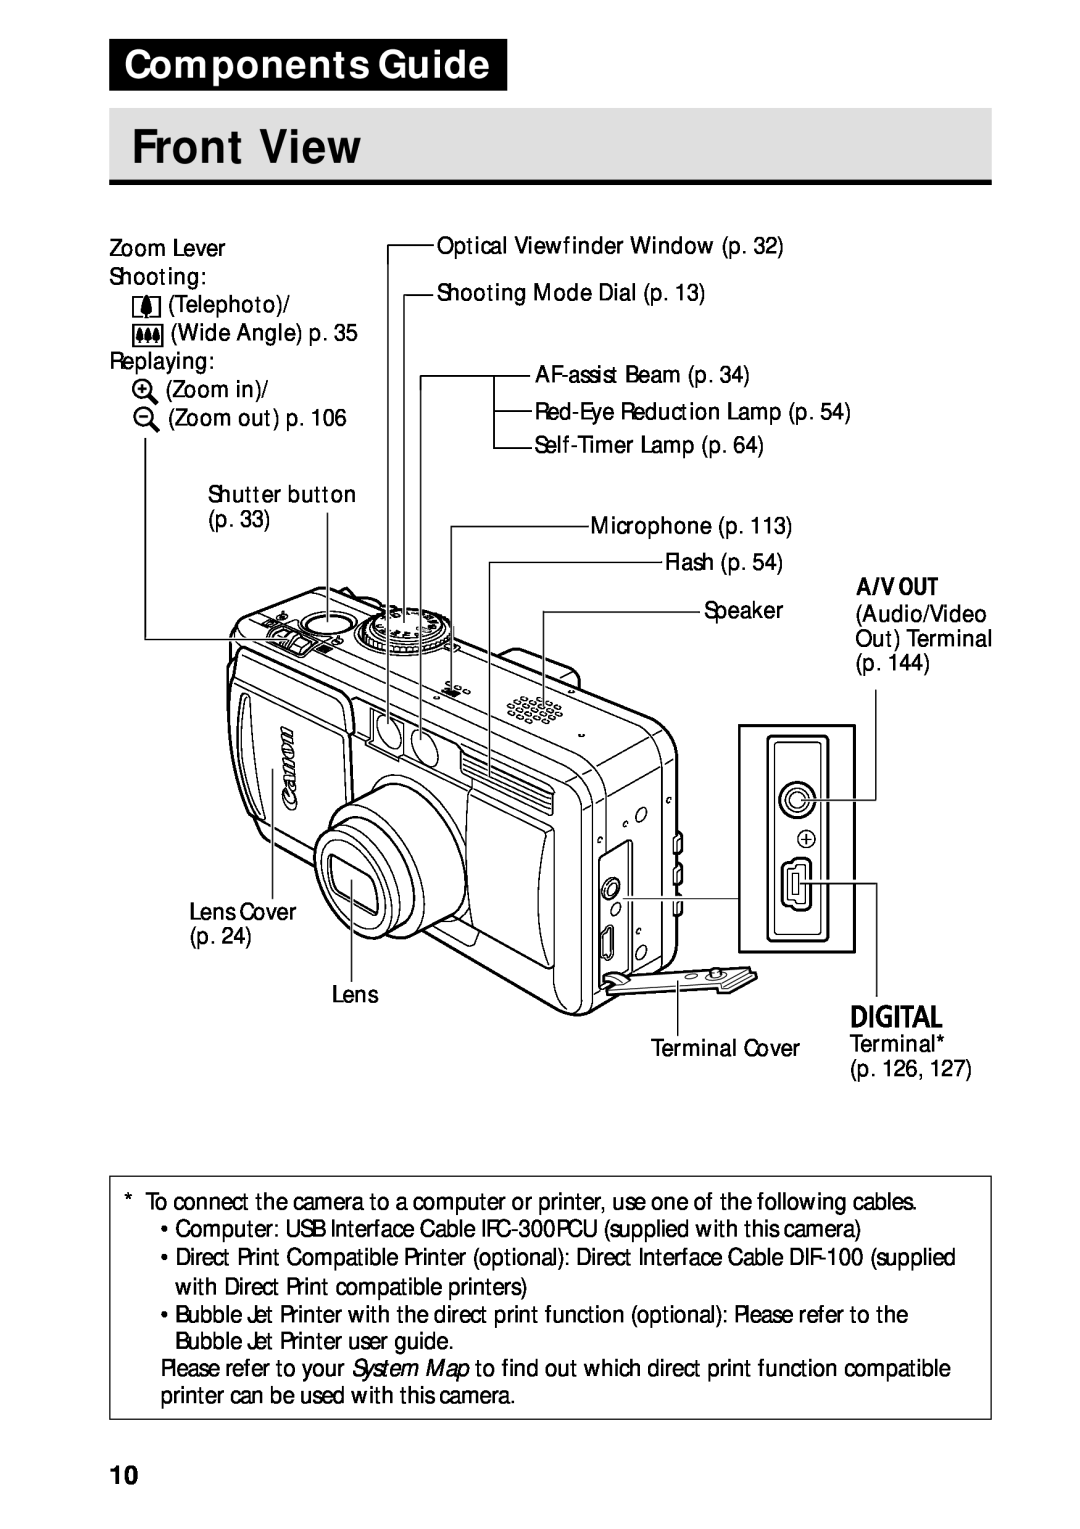 Canon PowerShot S45 manual Front View, Components Guide 